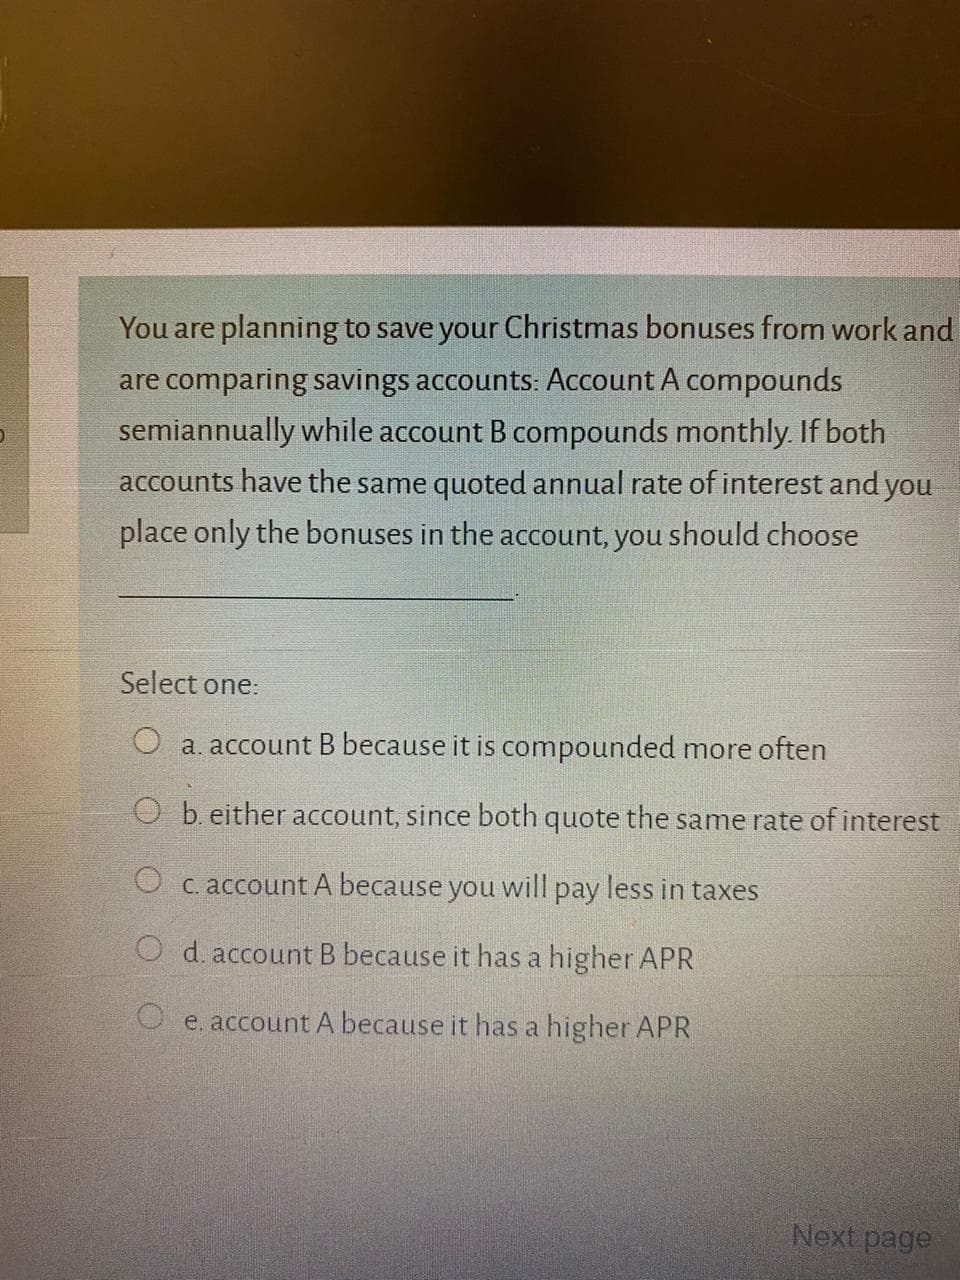 You are planning to save your Christmas bonuses from work an
are comparing savings accounts: Account A compounds
semiannually while account B compounds monthly. If both
accounts have the same quoted annual rate of interest and you
place only the bonuses in the account, you should choose
